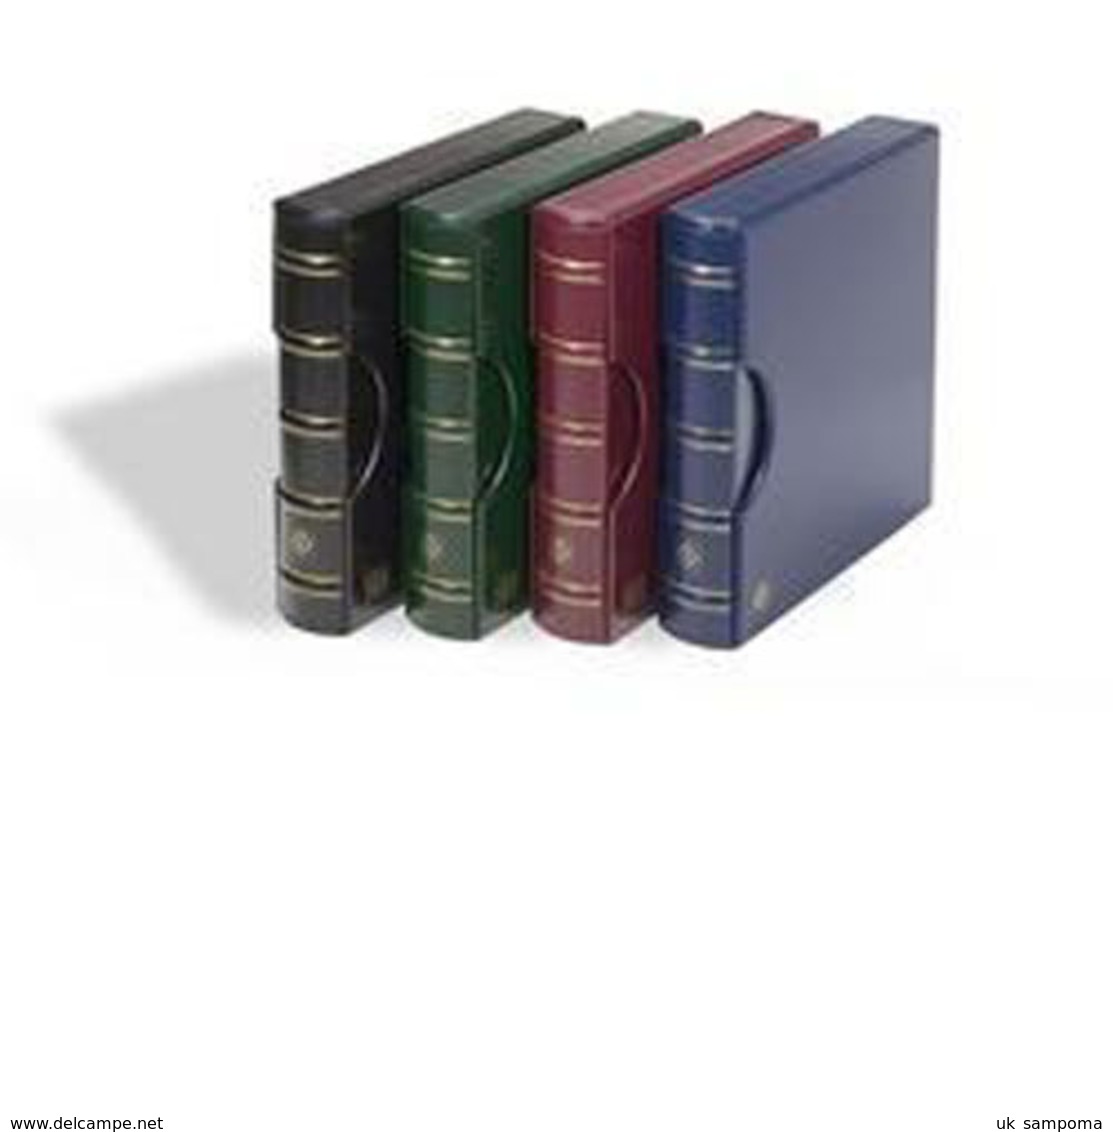 LIGHTHOUSE Ring Binder EXCELLENT DE, In Classic Design With Slipcase, Red - Formato Grande, Fondo Negro